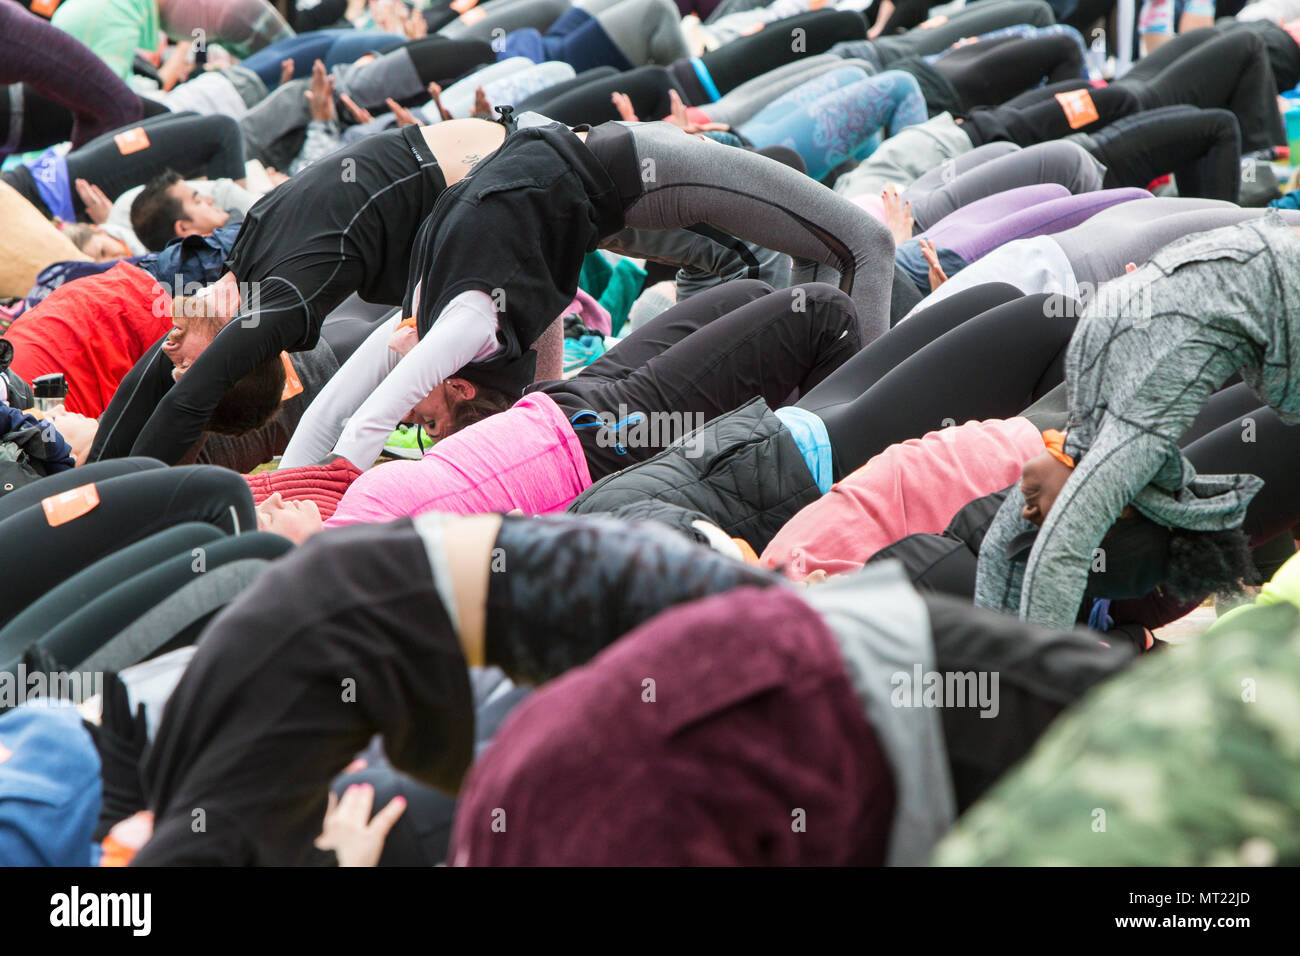 Dozens of people do the upward bow pose as they take part in a massive group yoga class in Piedmont Park on April 8, 2018 in Atlanta, GA. Stock Photo